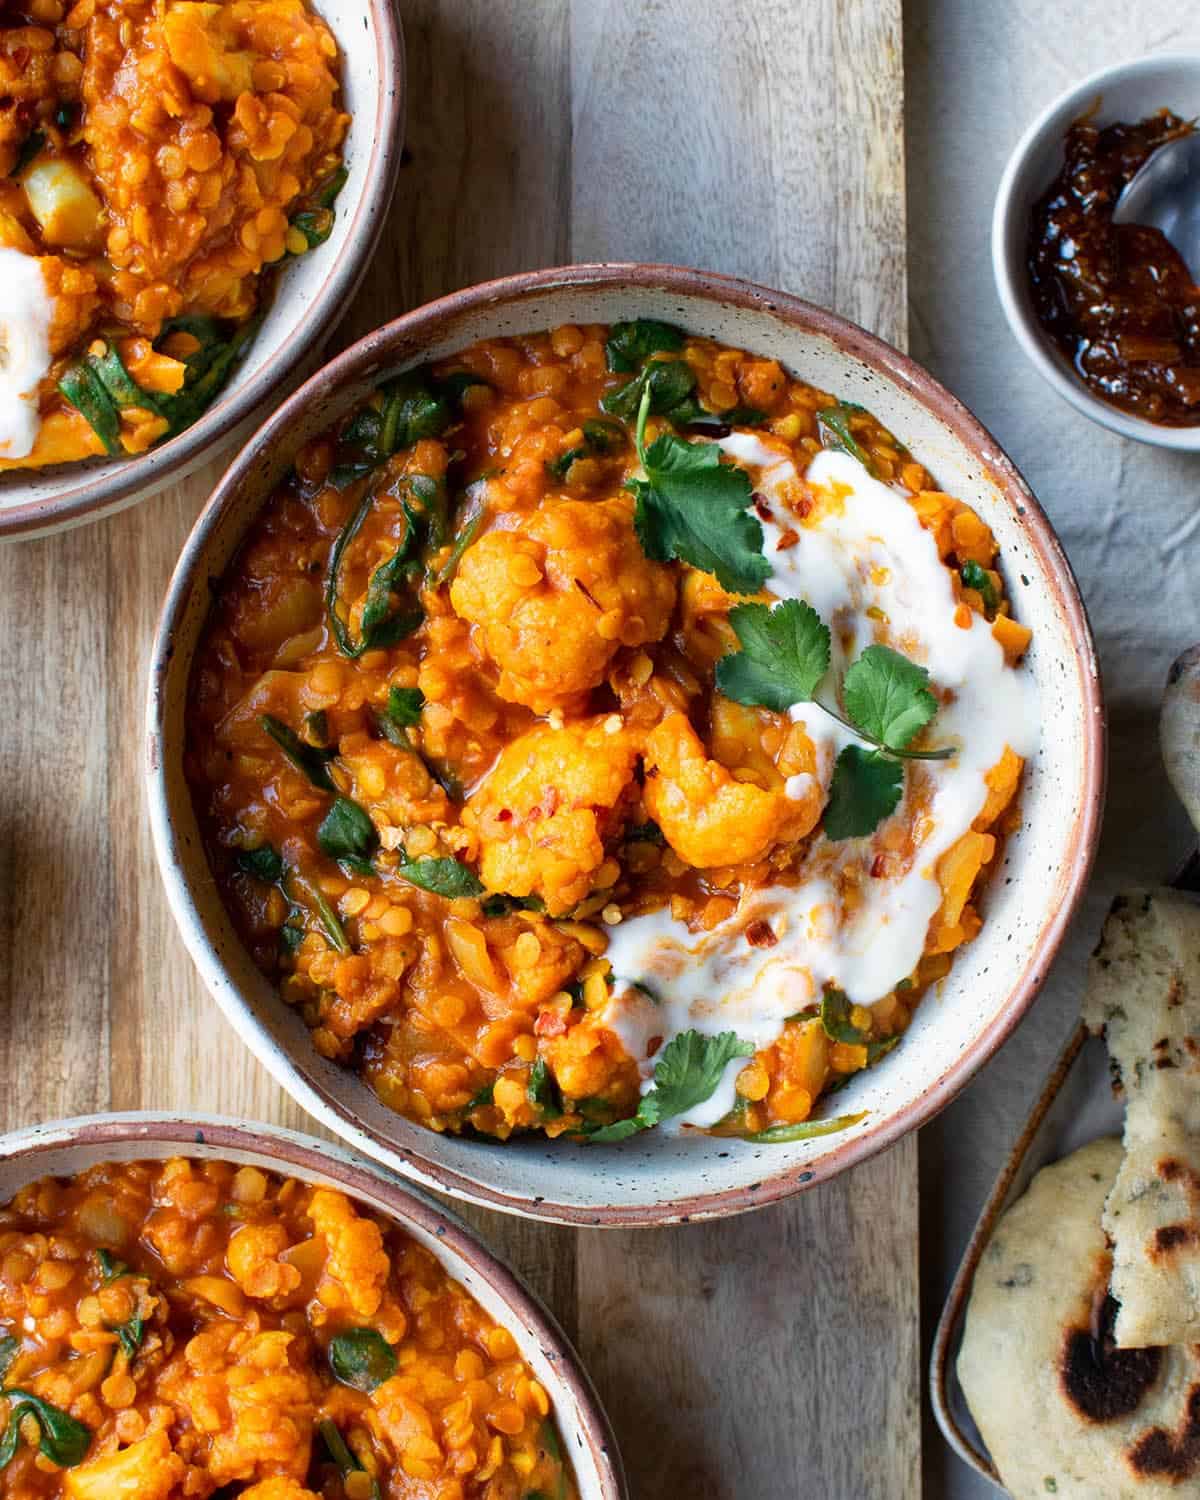 Red lentil curry in a bowl with two more bowls of curry, chutney and naan.